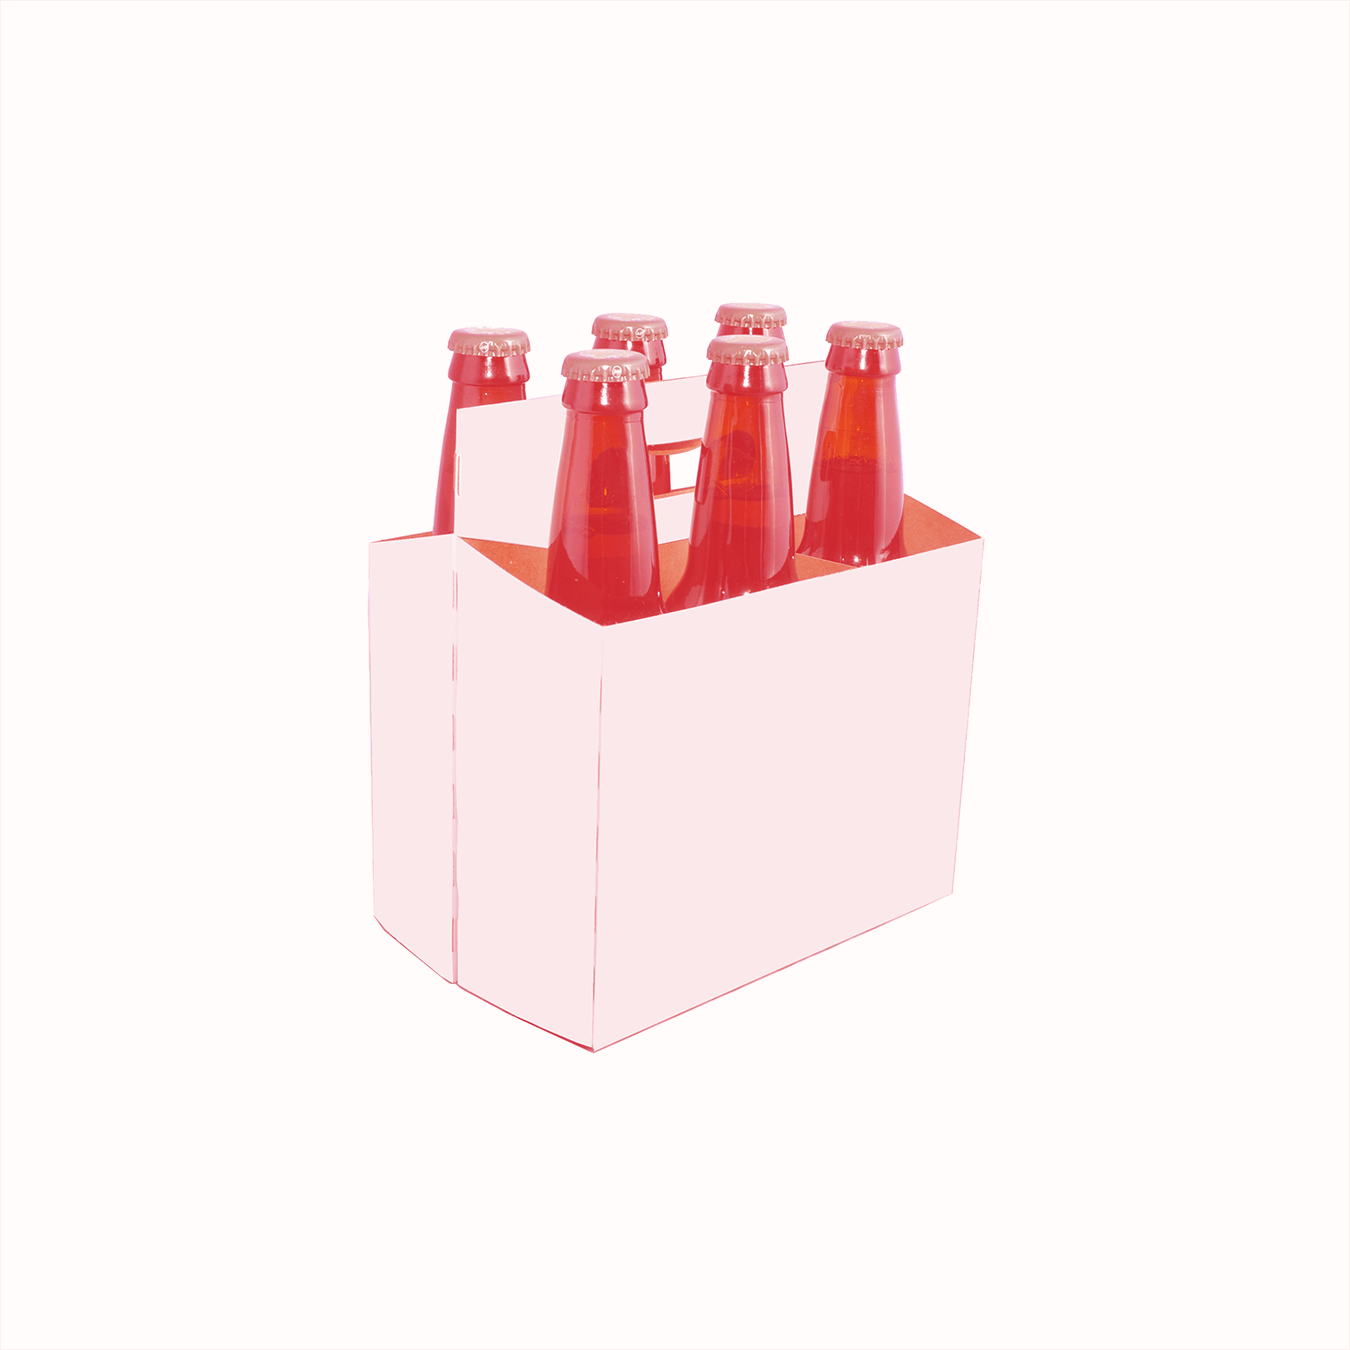 6-Pack Drink Carrier Resized.png